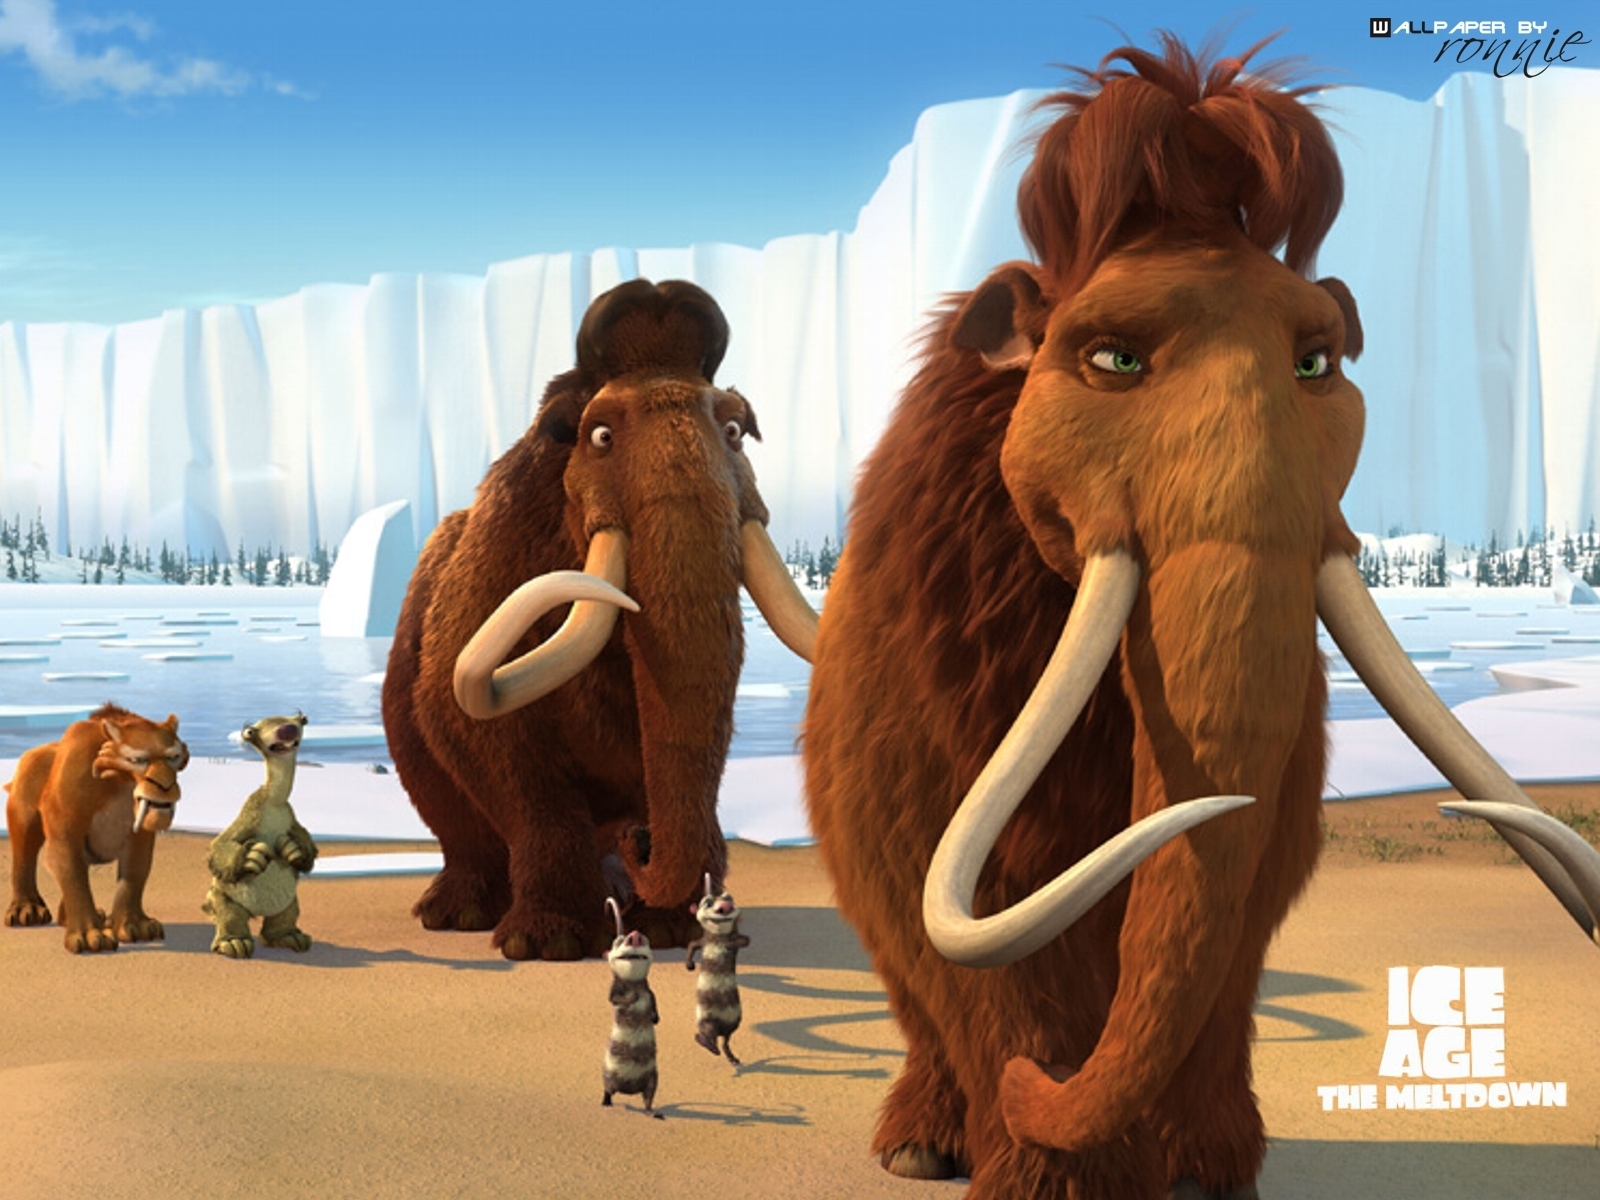 Ice Age: The Meltdown Wallpapers